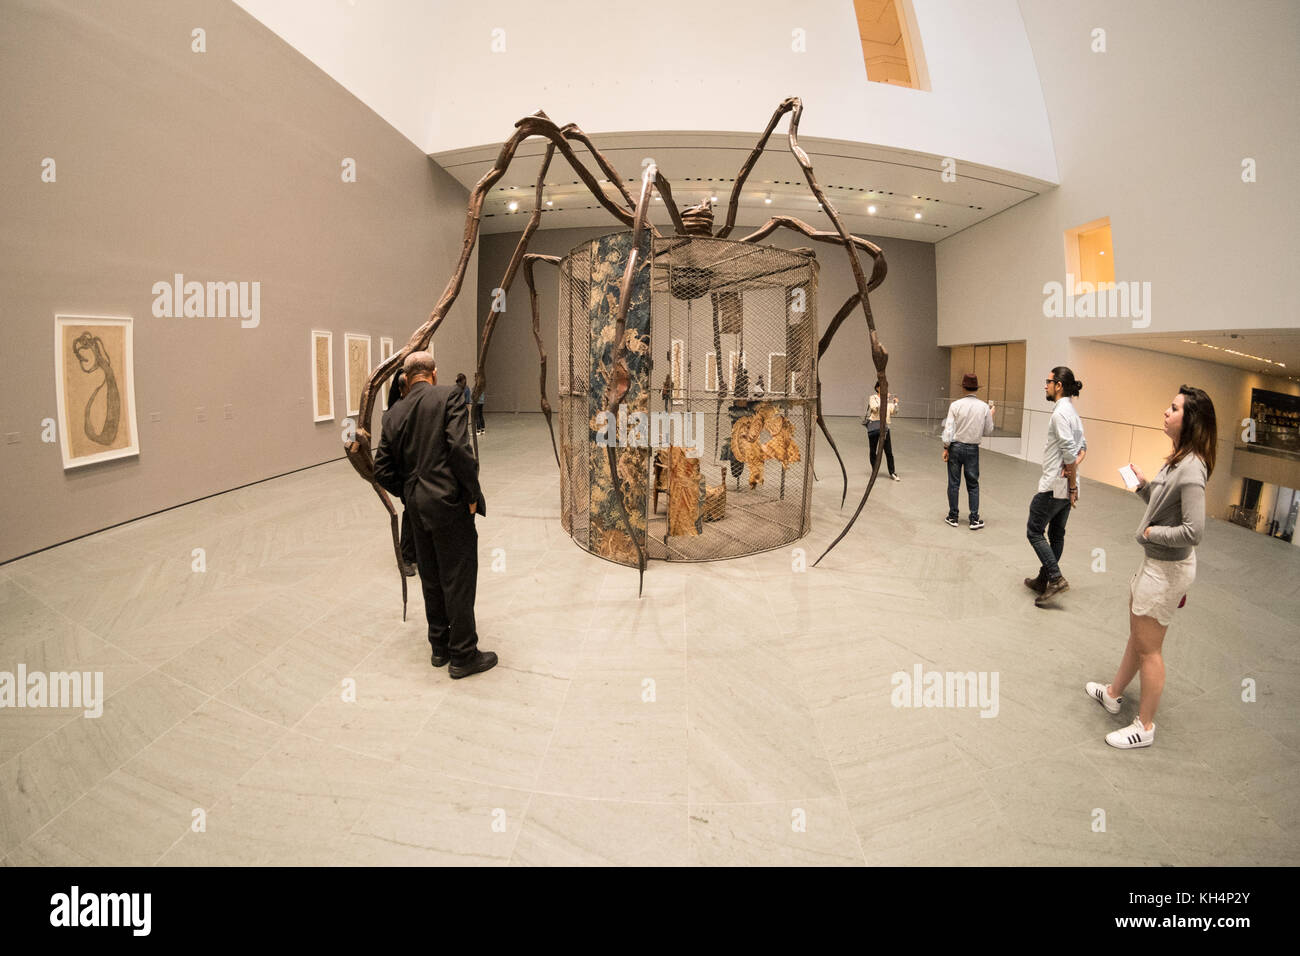 Louise Bourgeois, An Unfolding portrait exhibition at MoMa, The Stock Photo  - Alamy